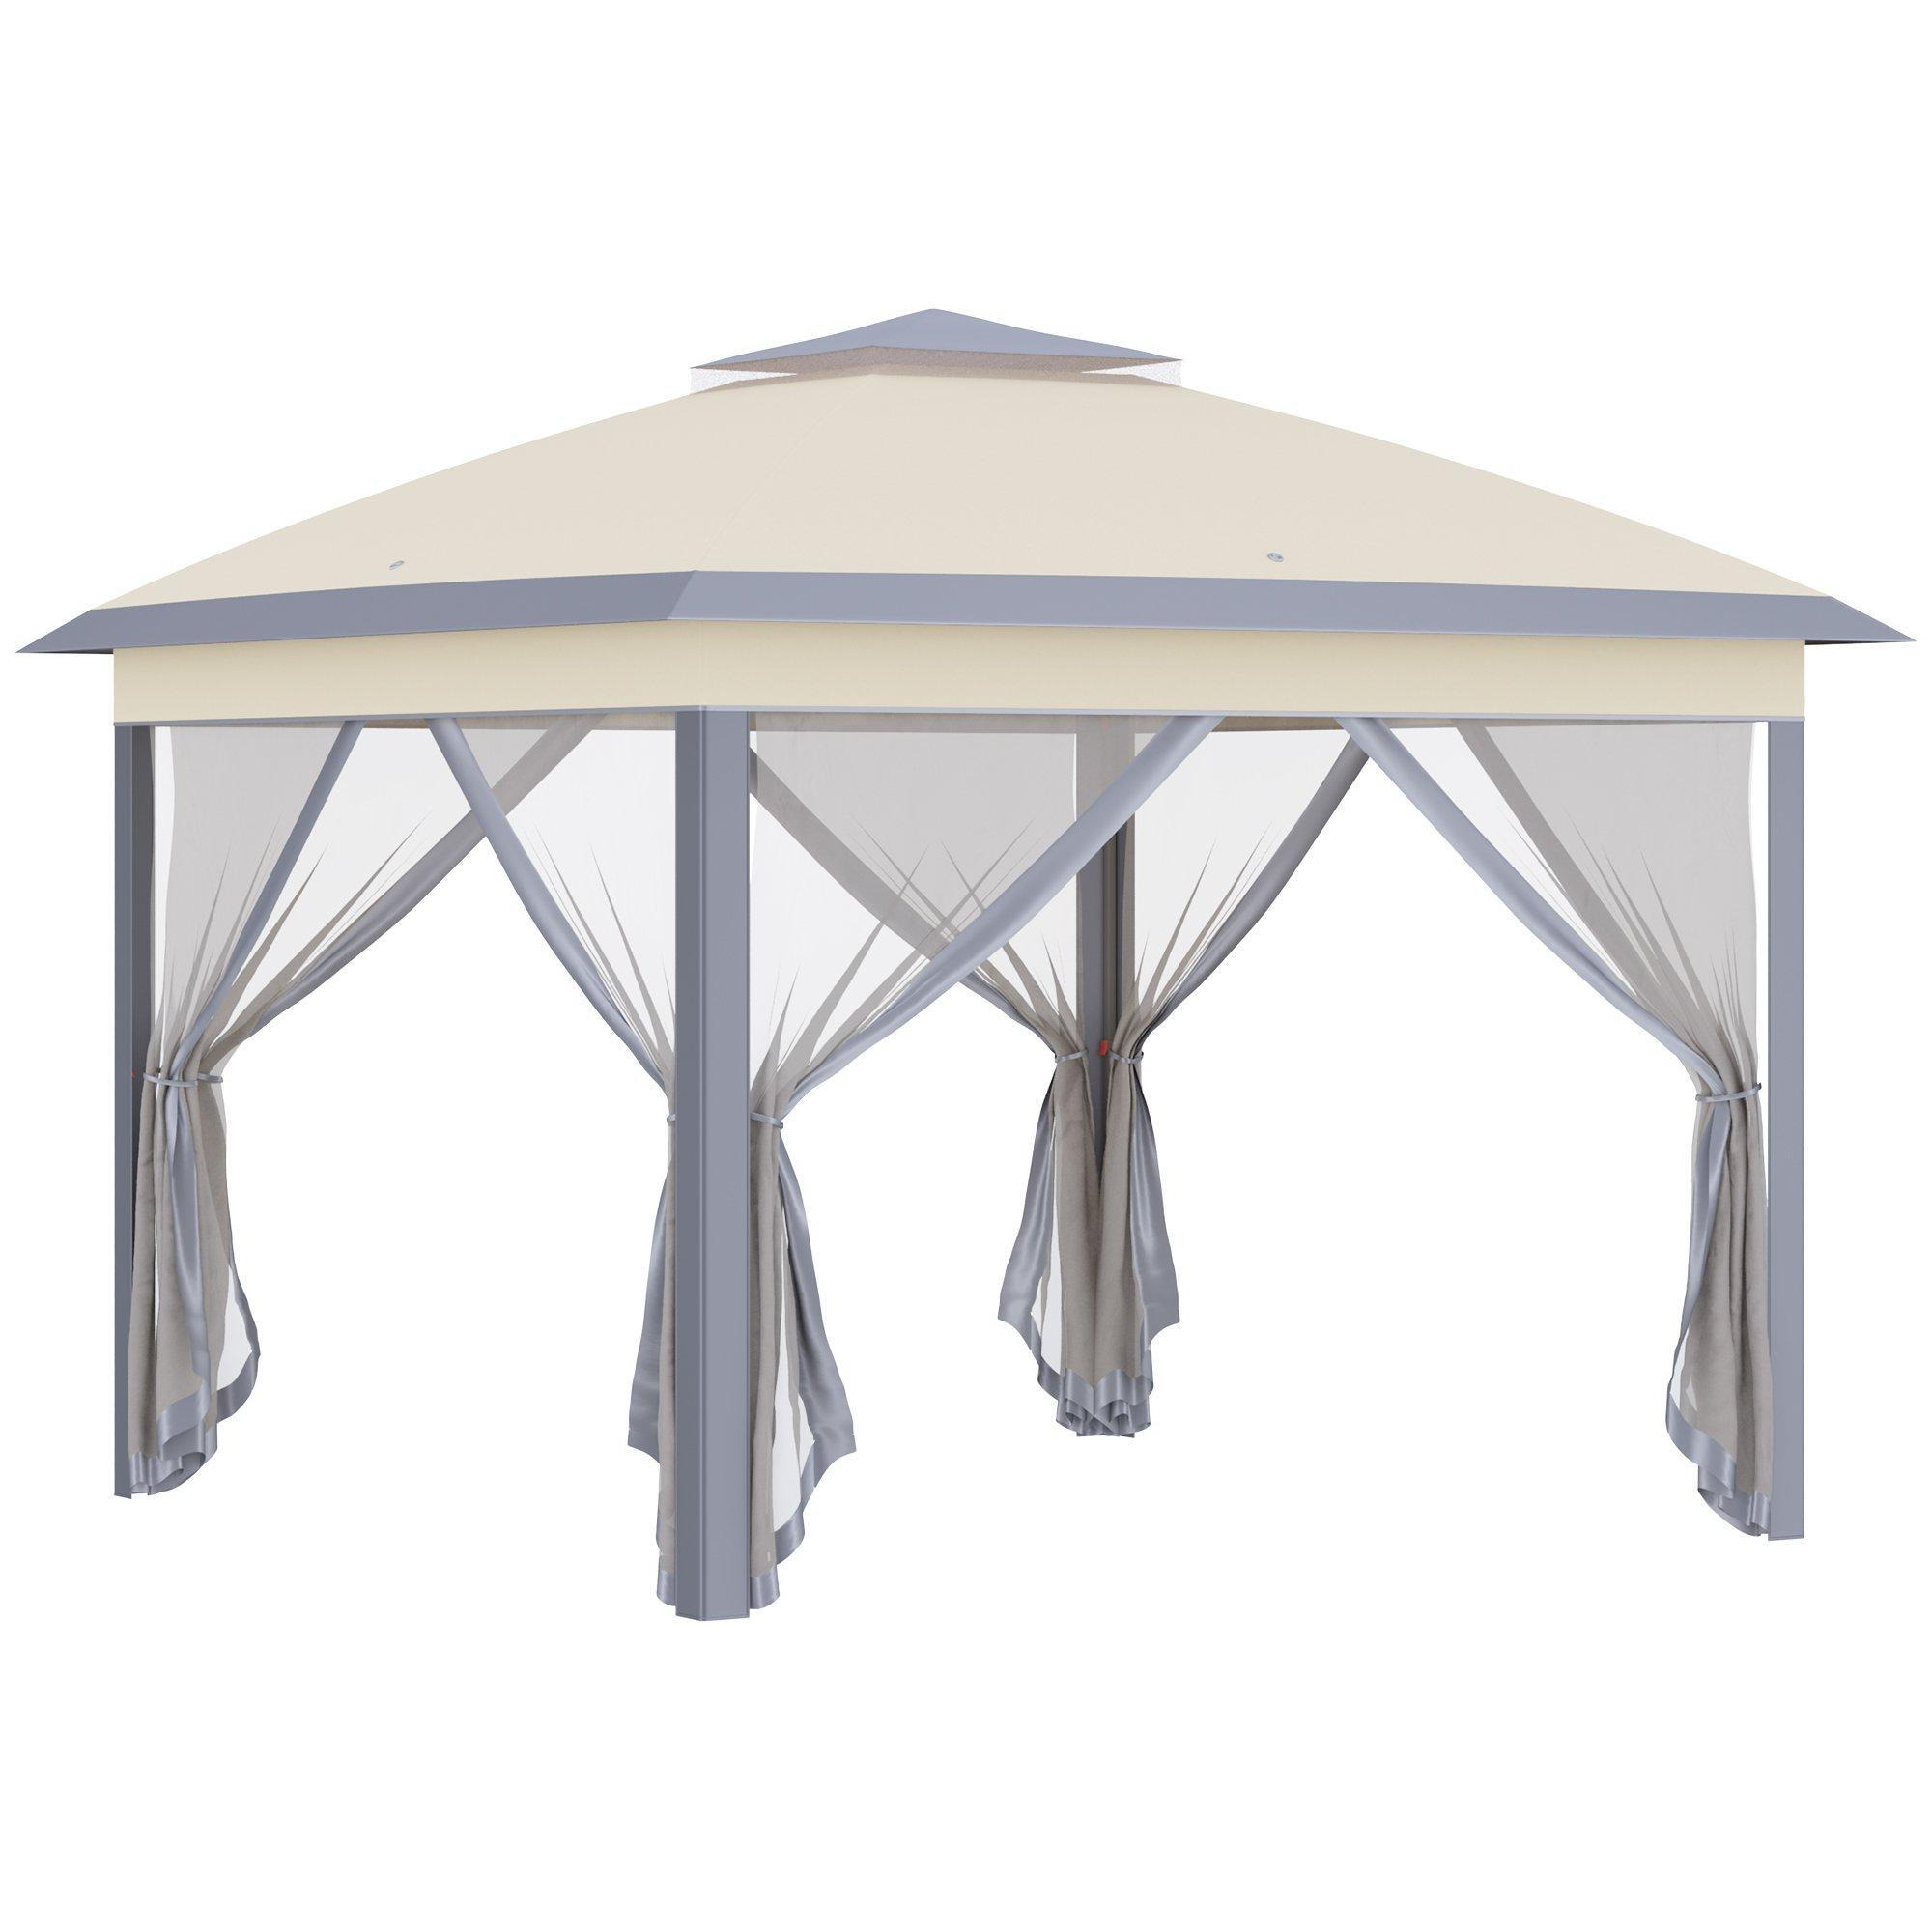 Pop Up Gazebo Height Adjustable Canopy Tentwith Carrying Bag - image 1